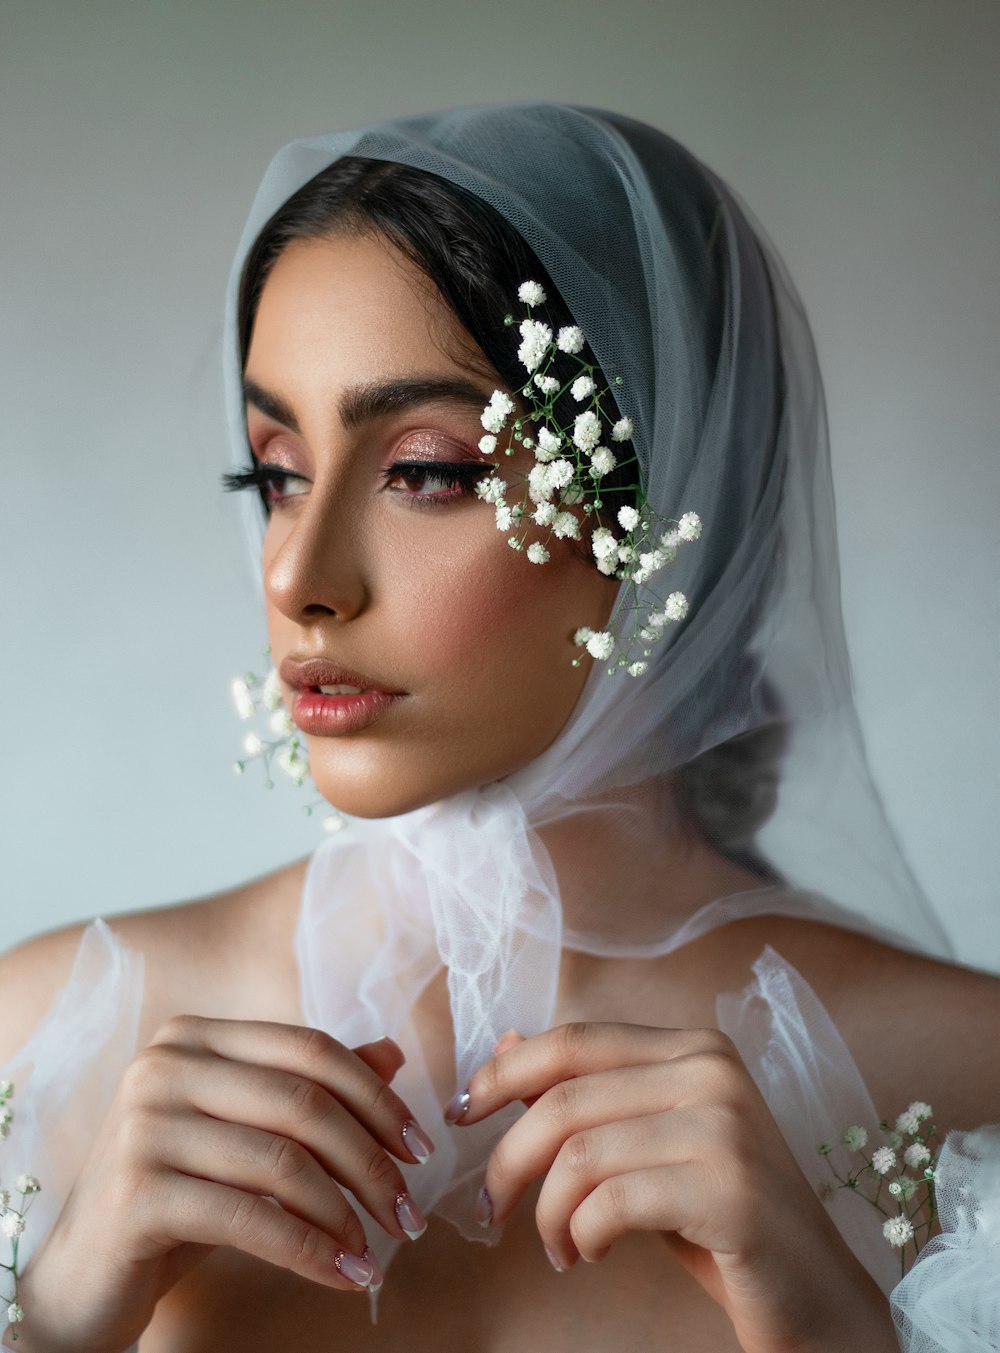 a woman with a veil and flowers in her hair